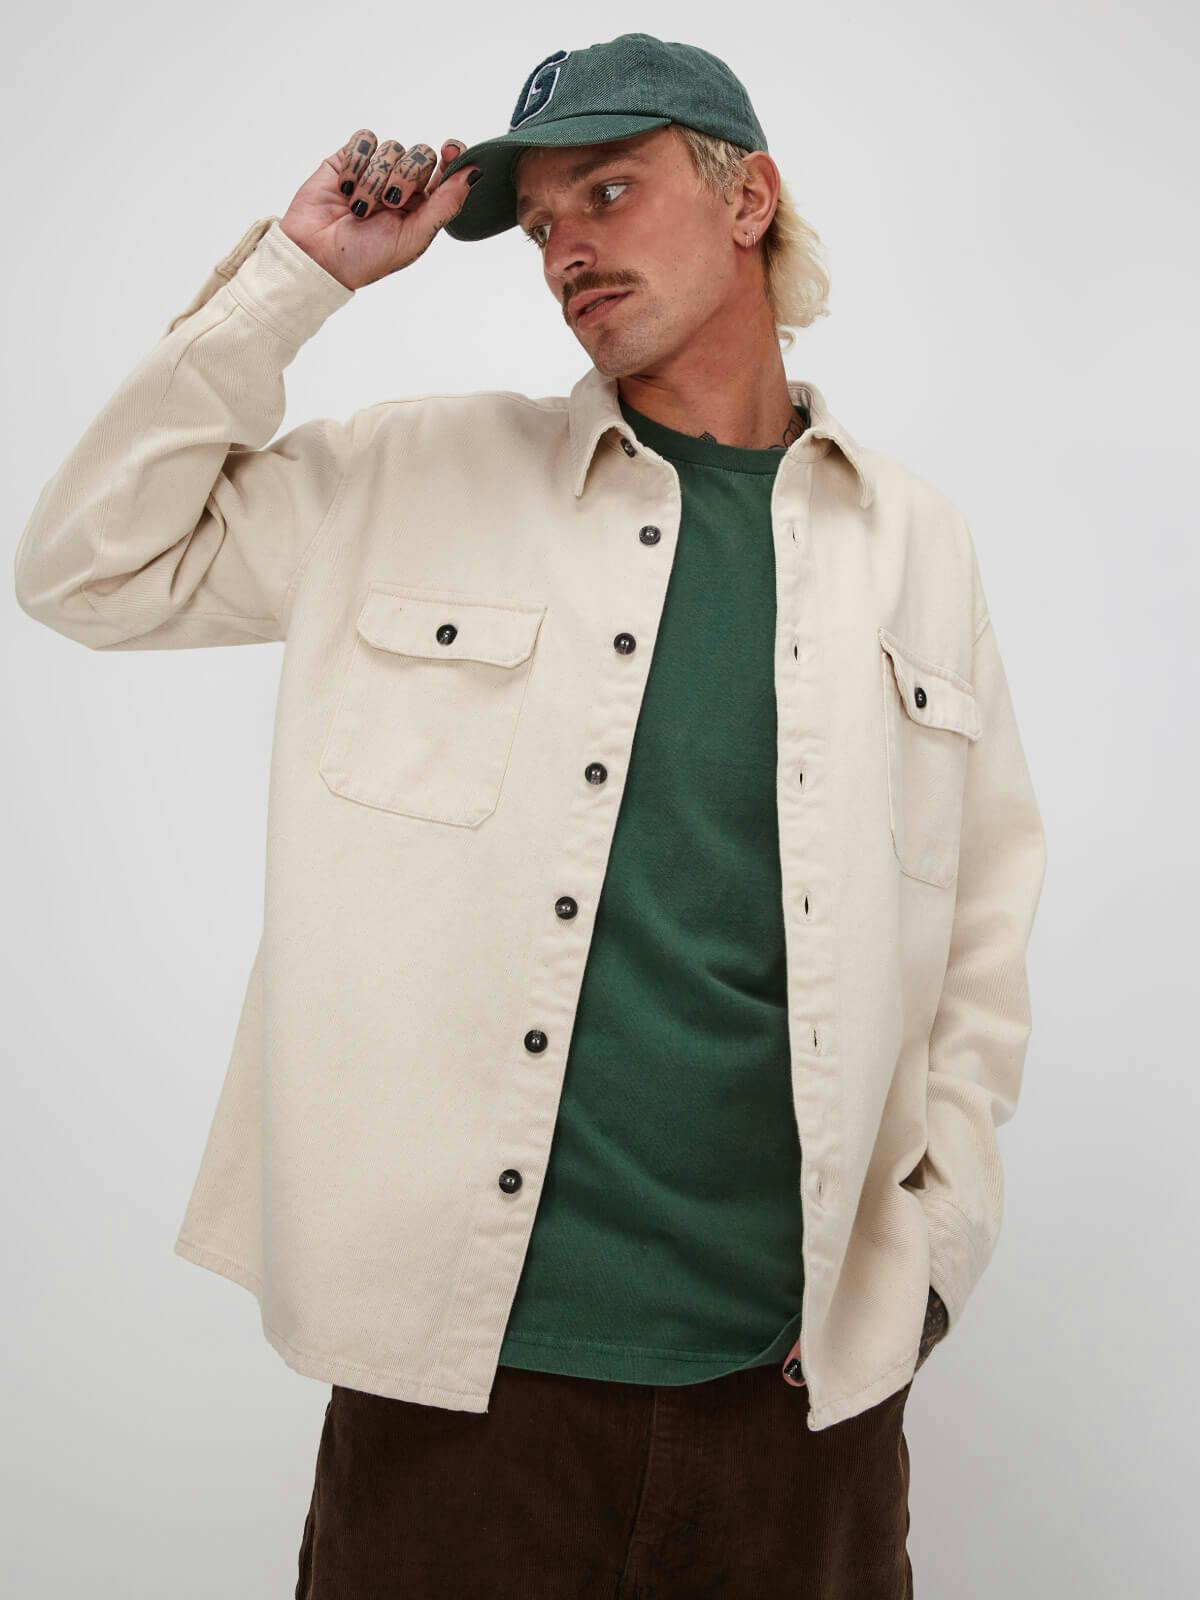 Image of male model in studio. He is wearing the Maui Tee under the Drill Jacket with a Classic Cap and the Timmy Cord Pants in Cacao